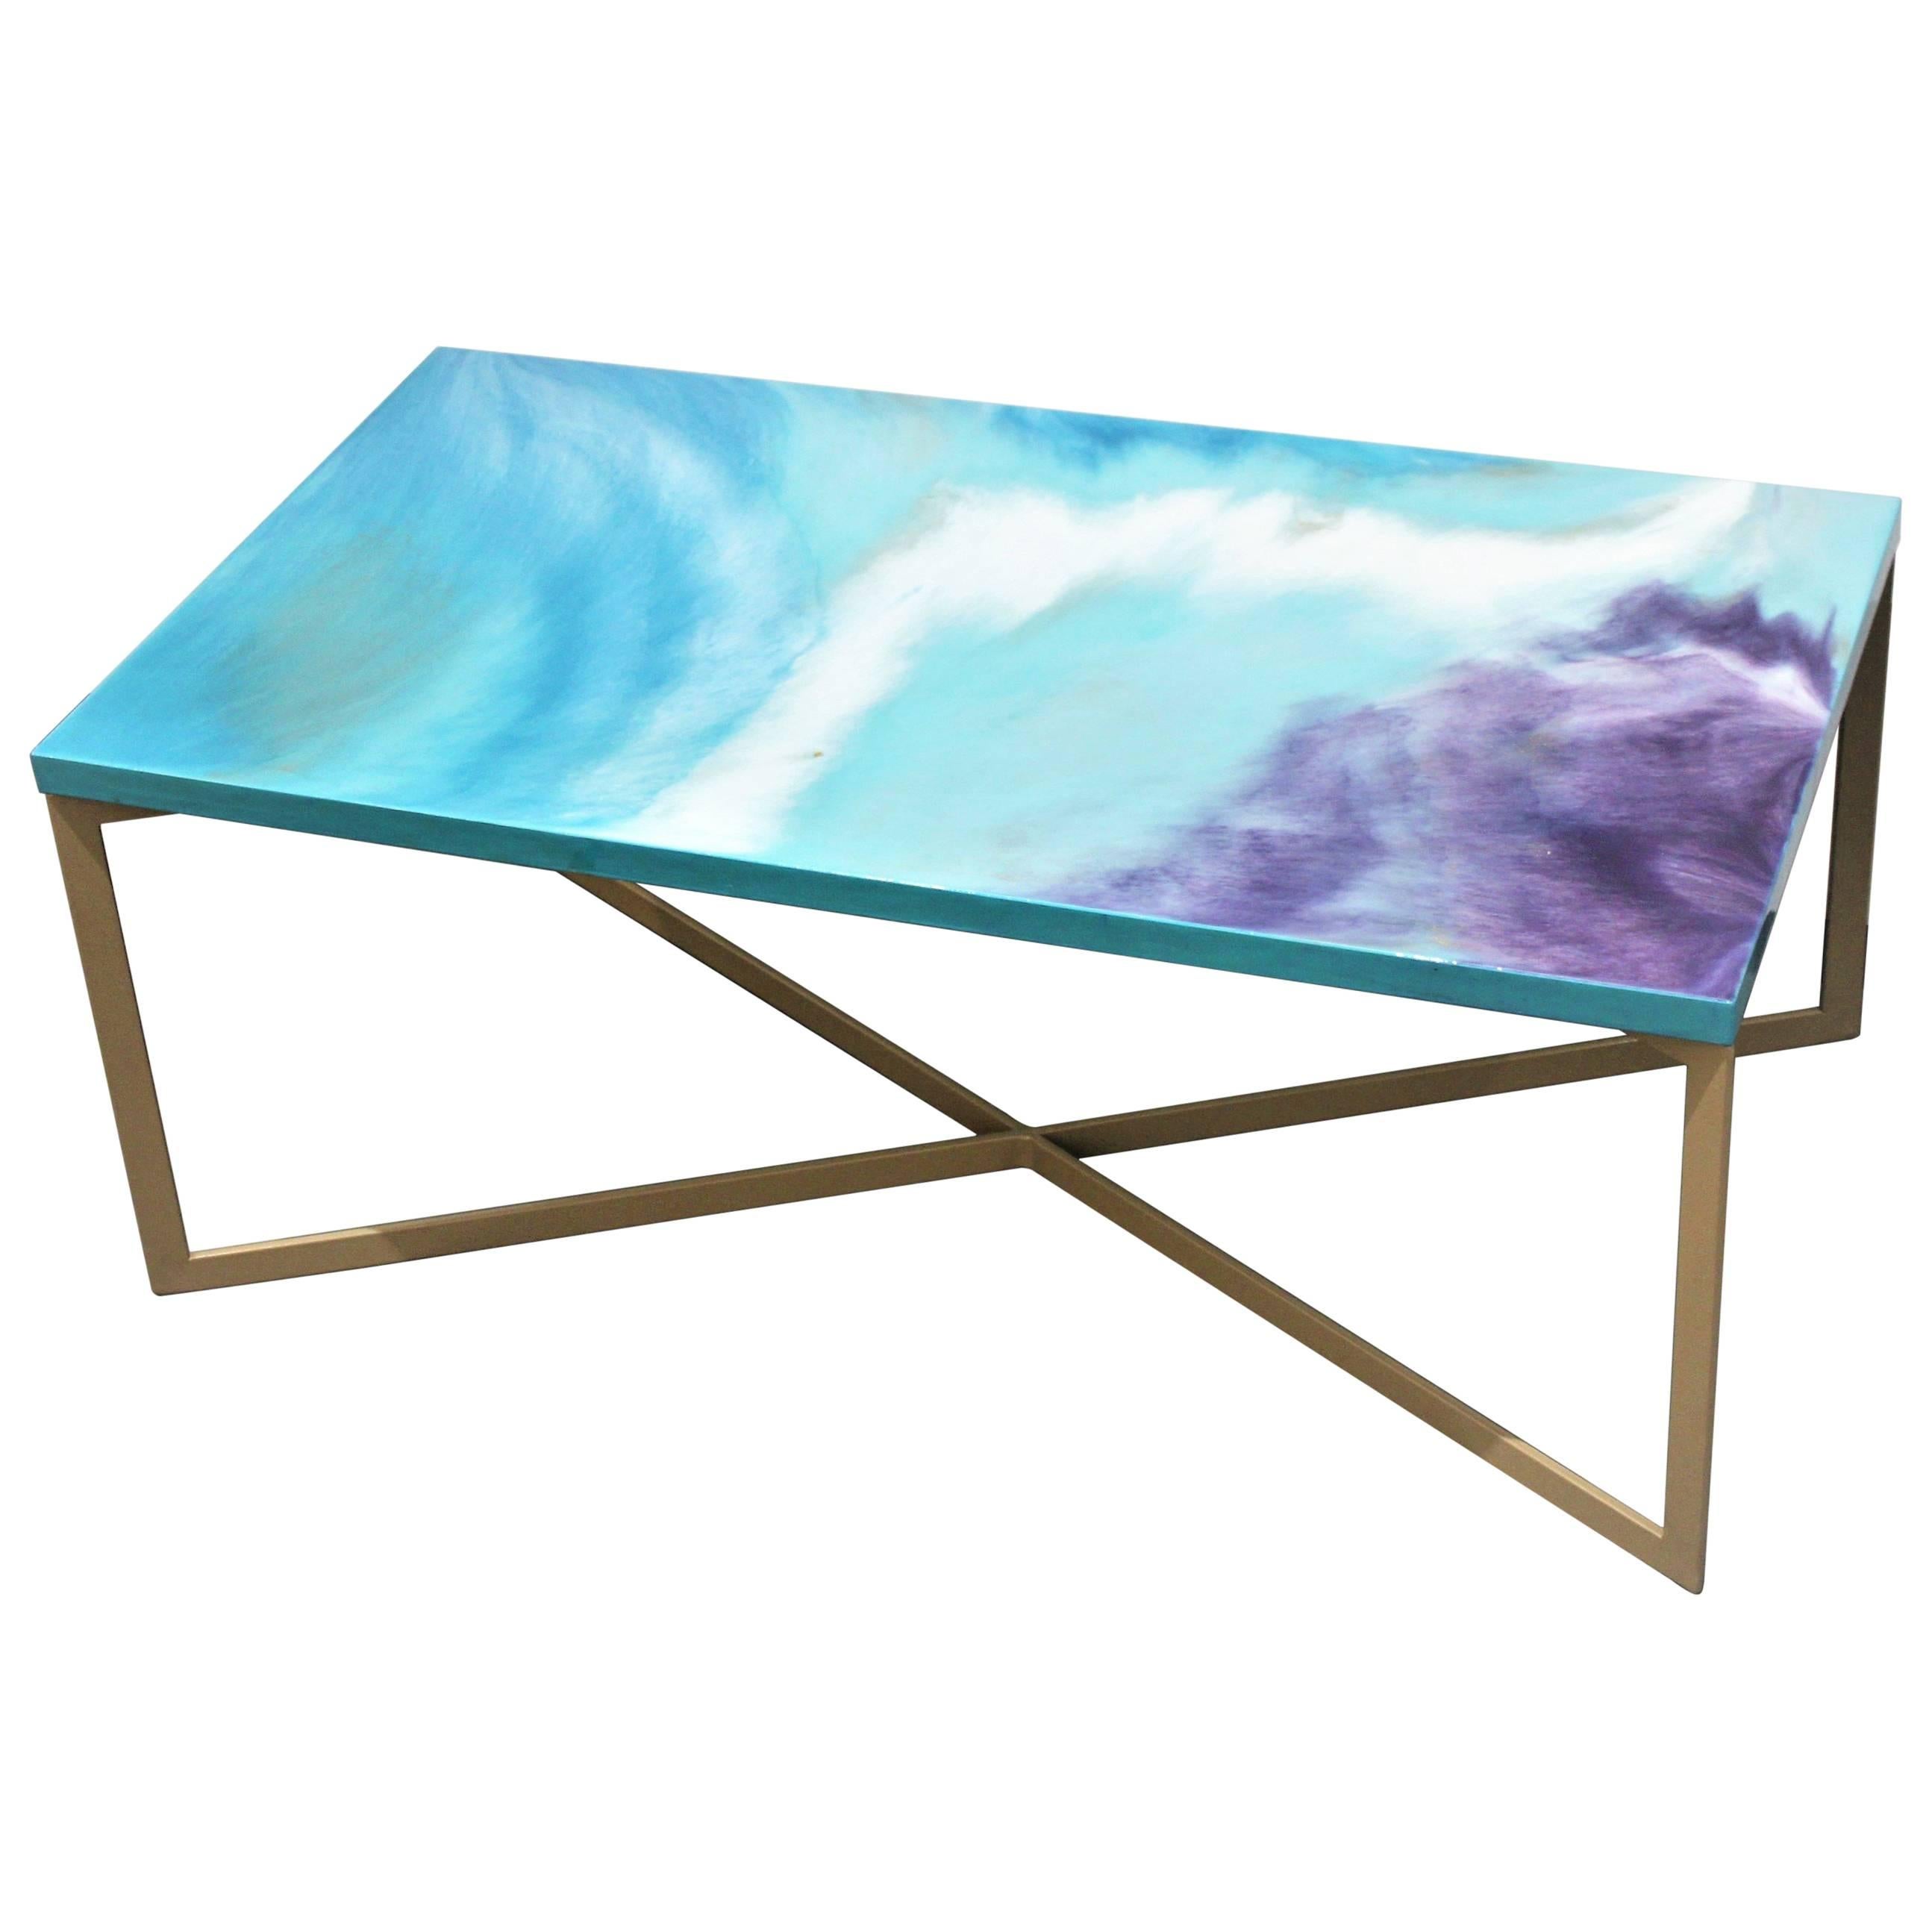 Contemporary Resin Coffee Table "Turquoise Mood" on Satin Steel Base For Sale